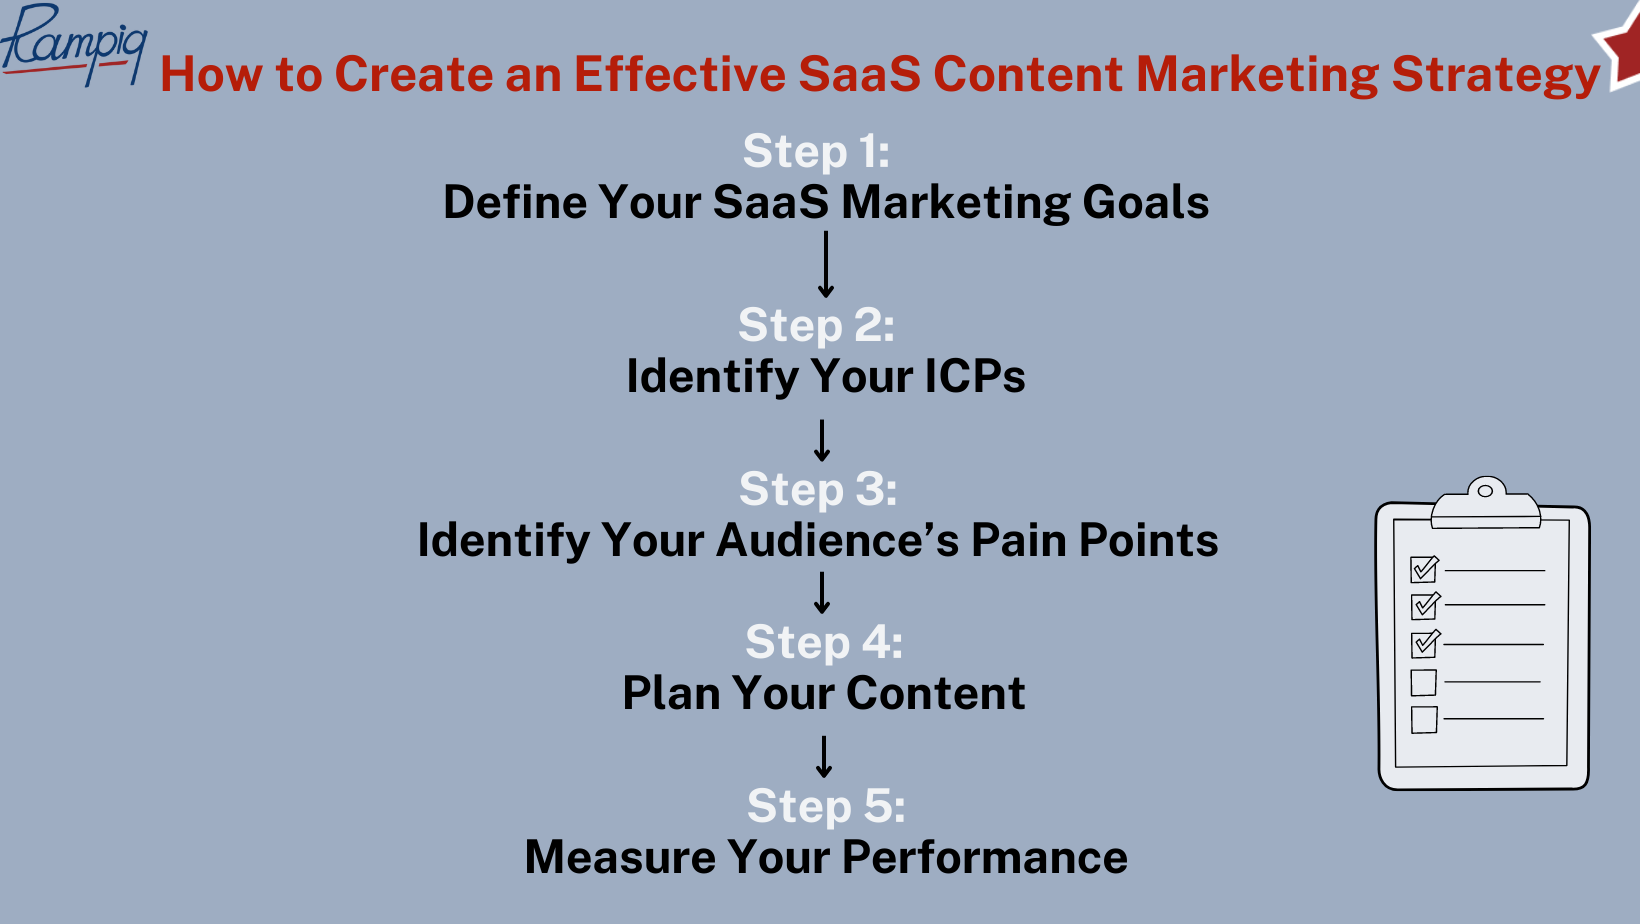 How to Create an Effective SaaS Content Marketing Strategy